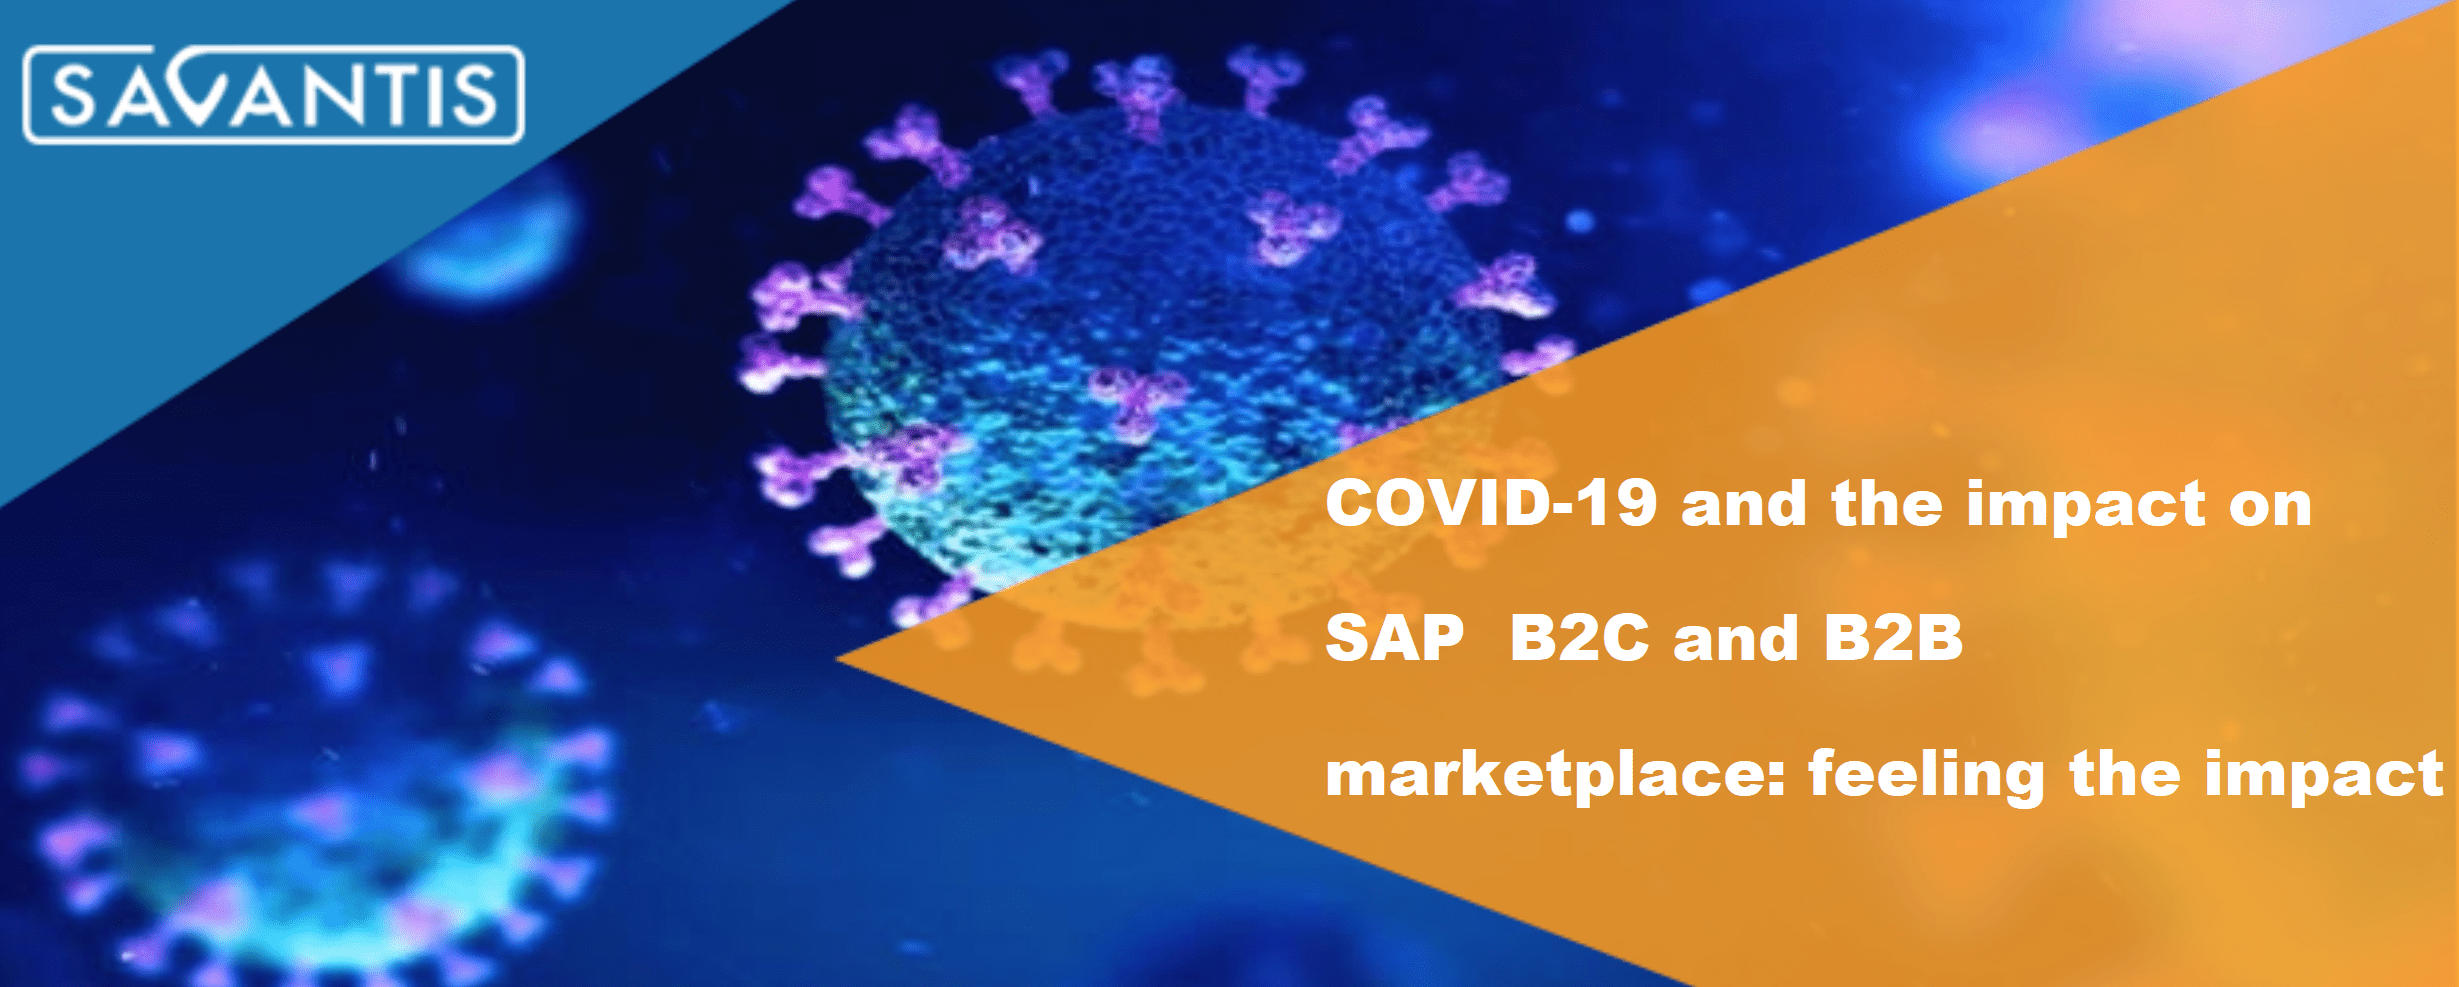 COVID-19 and the impact on SAP B2C and B2B marketplace: feeling the impact